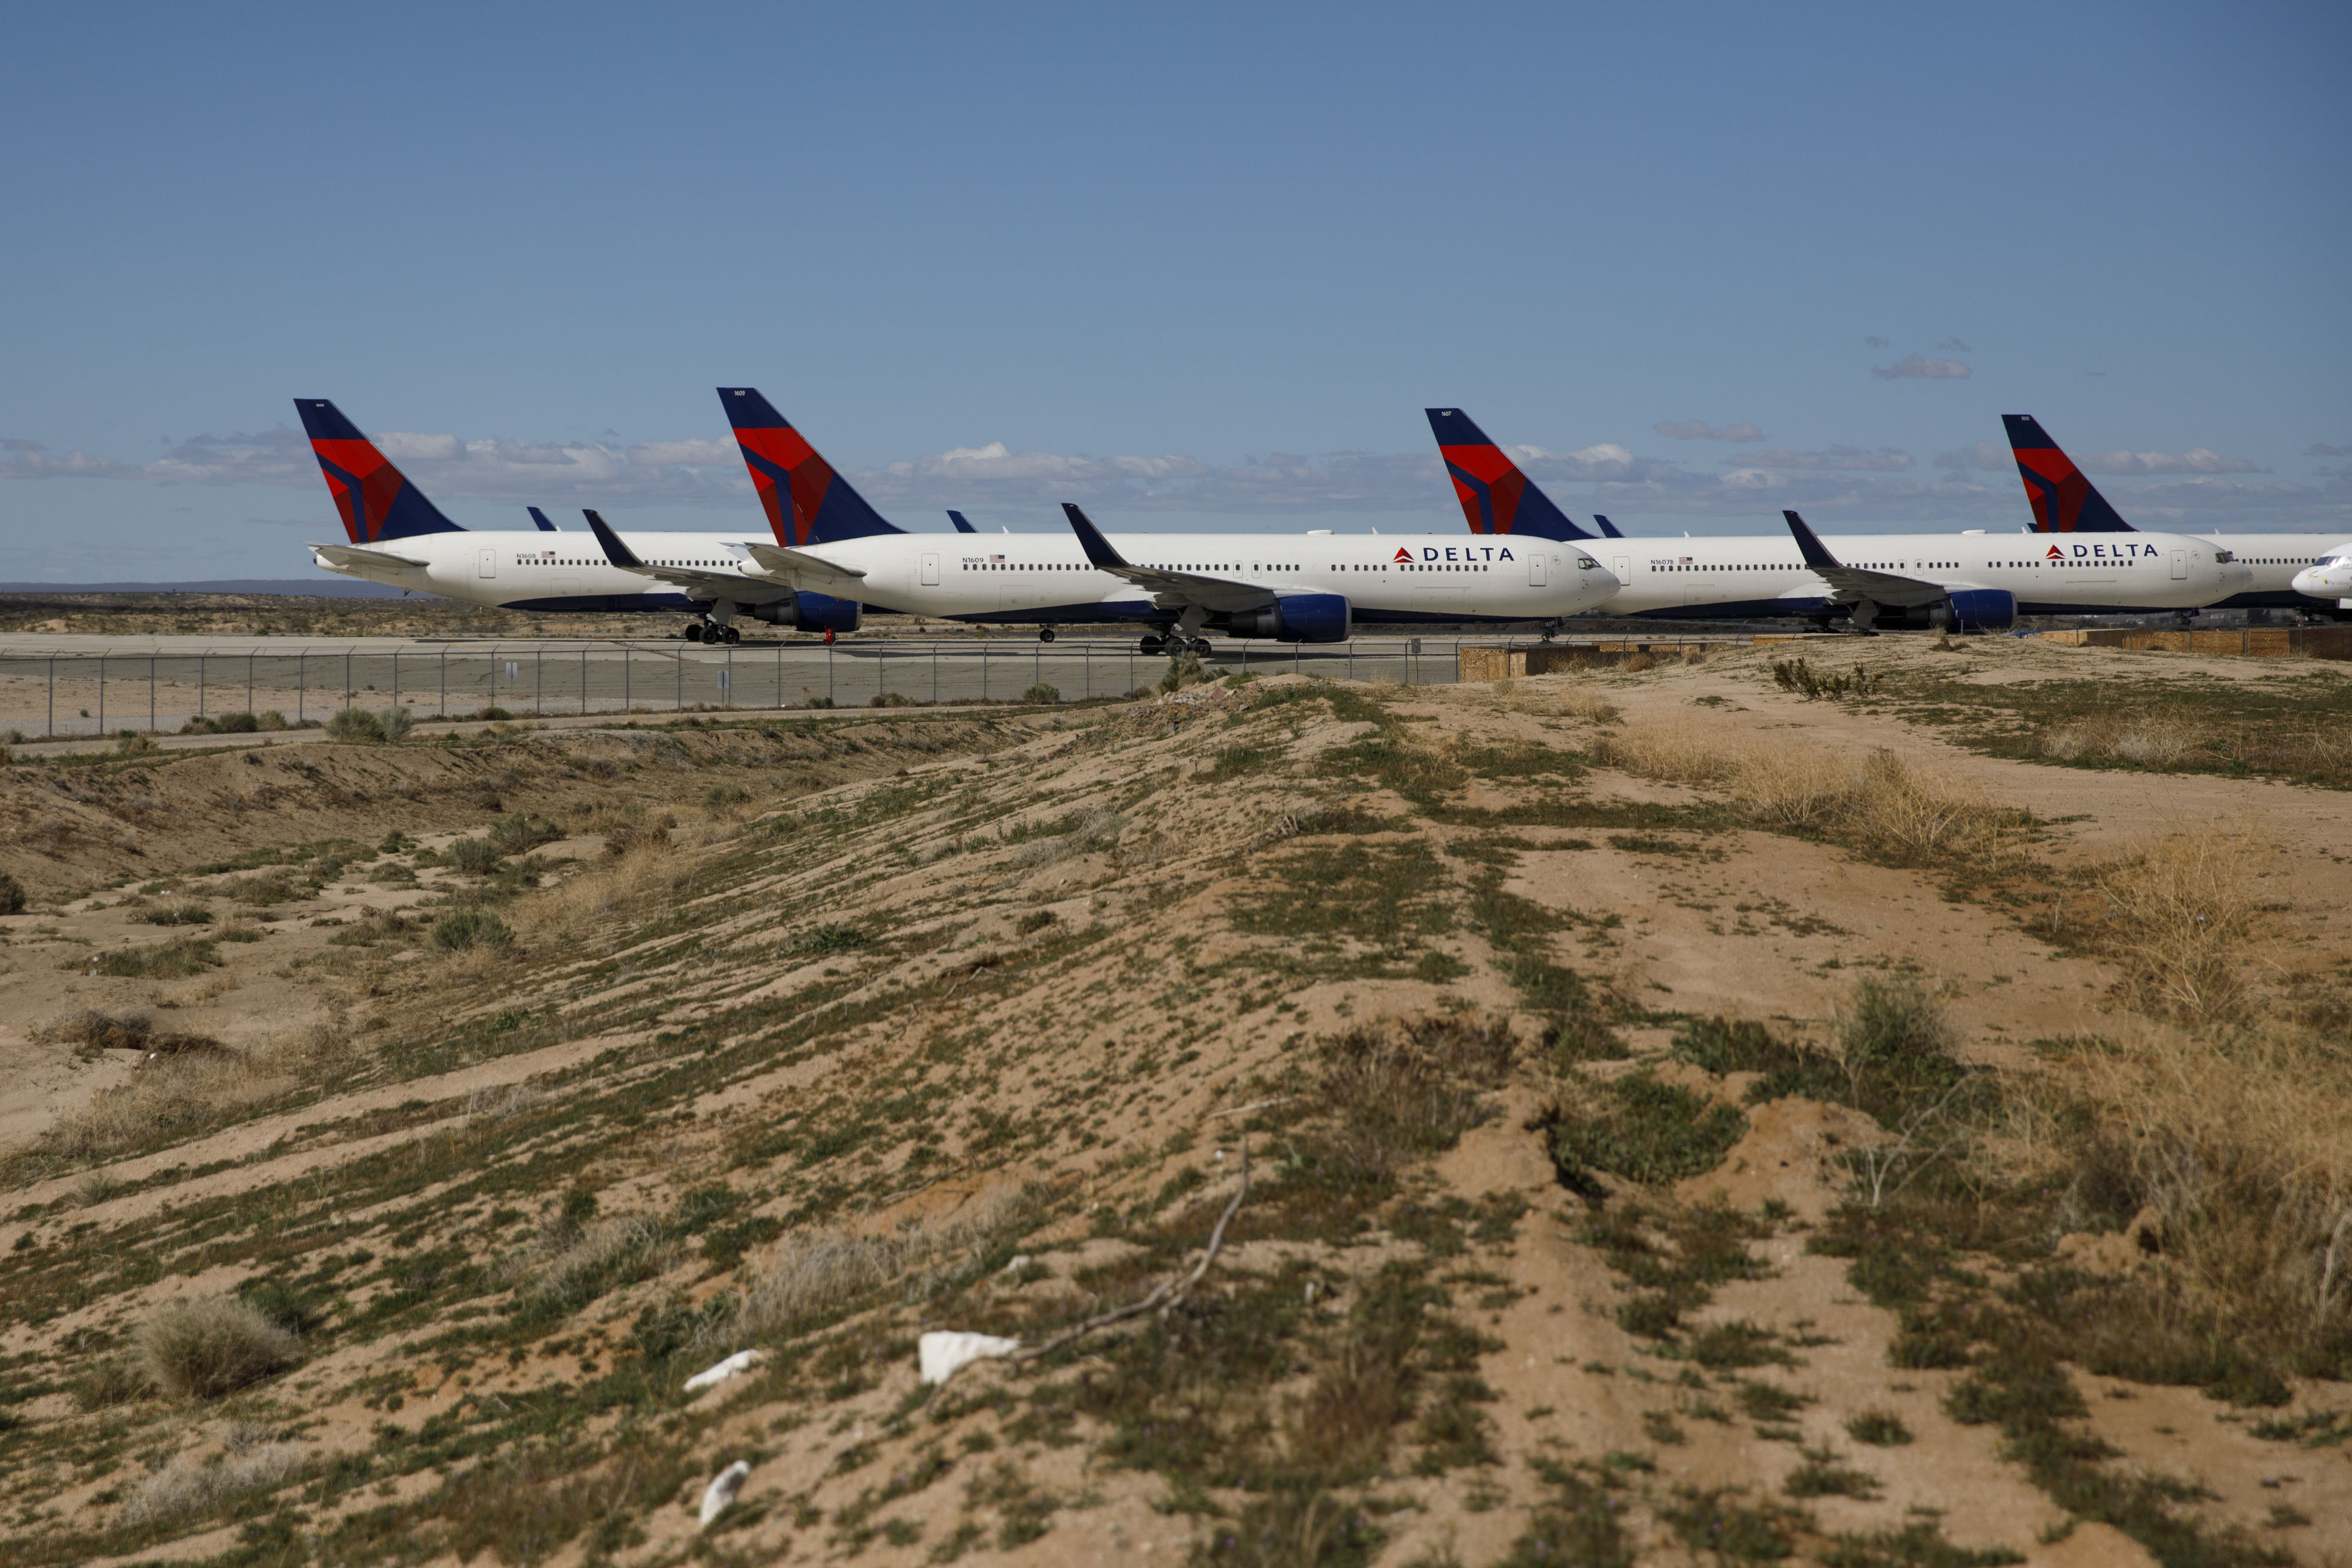 Delta Air Lines aircraft sit parked at a field in Victorville, California on March 23.